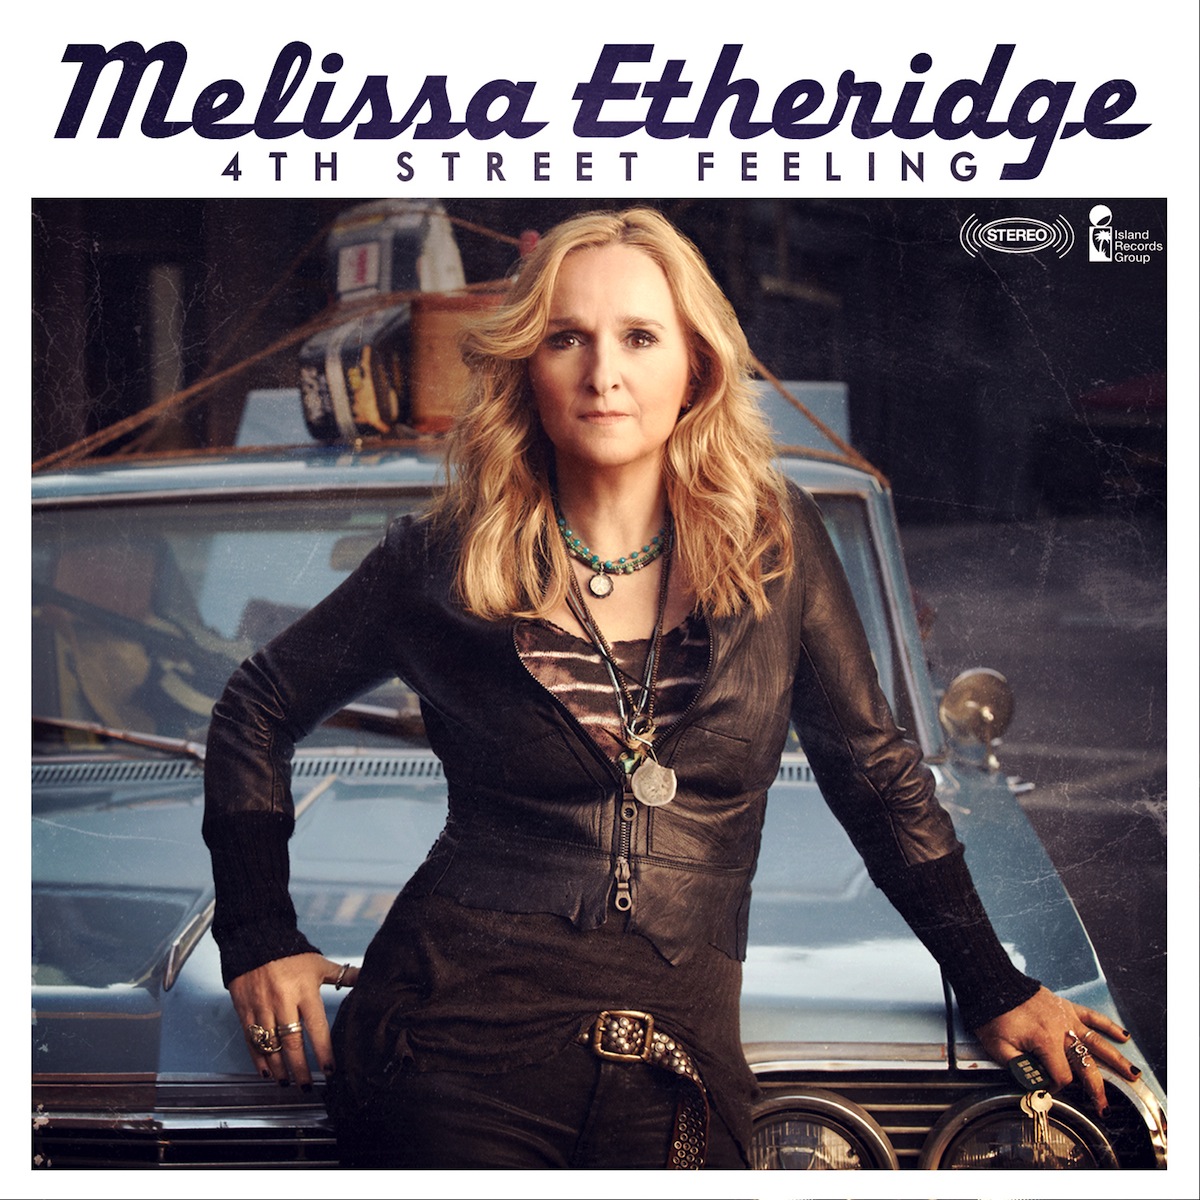 Www Kinnar Seelip New Com - Melissa Etheridge: On Being On The Road - The Gay & Lesbian Review